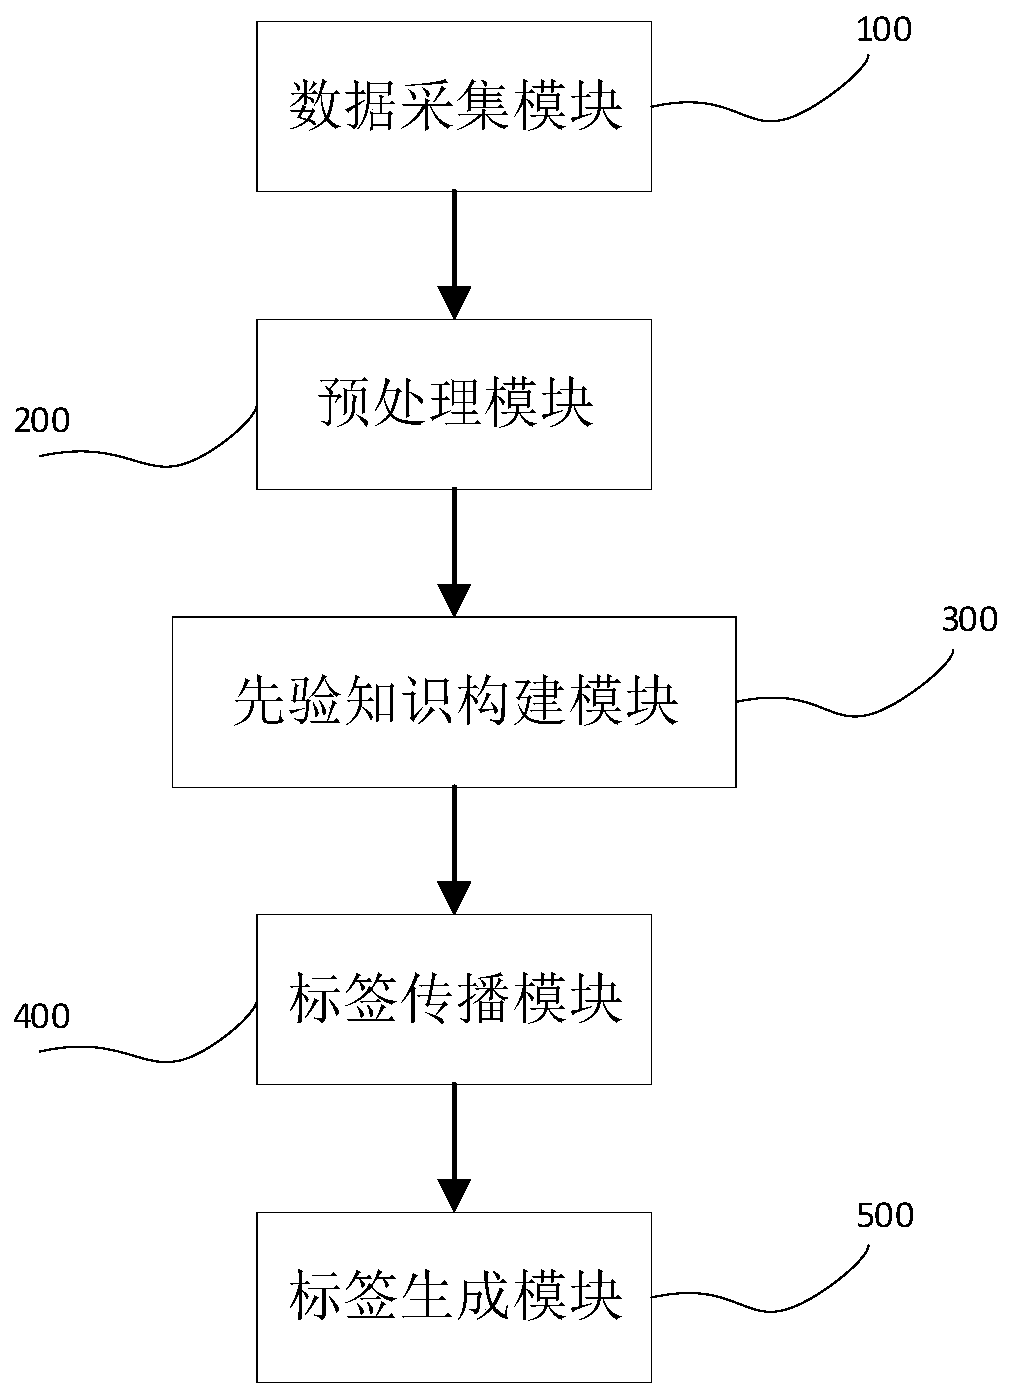 Multi-label propagation method and system based on implicit association